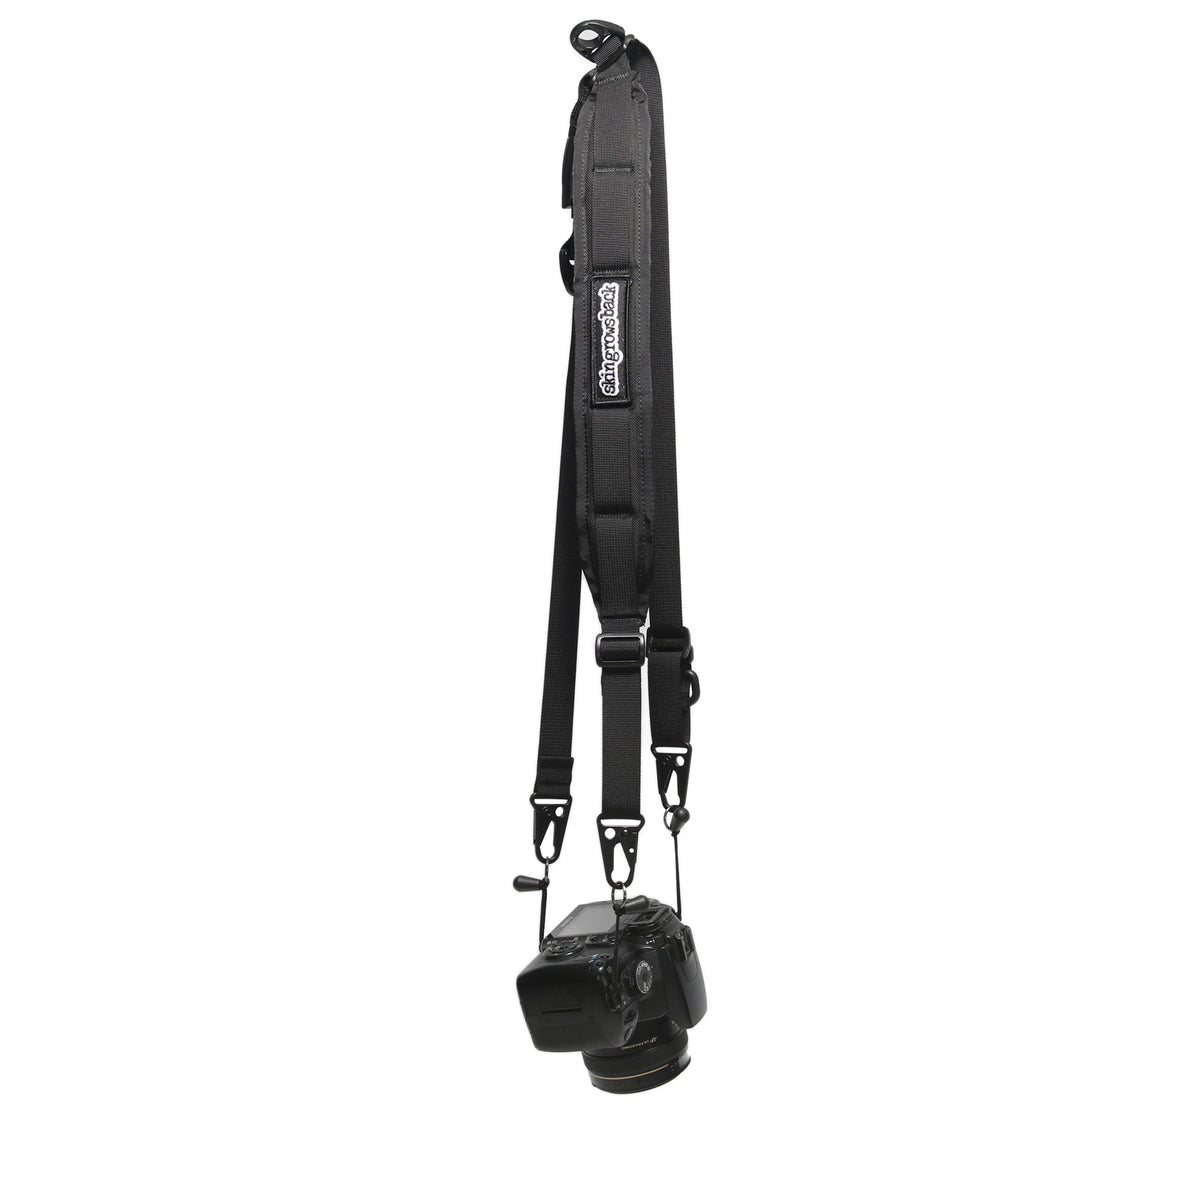 SHOP 3POINT CYCLING CAMERA STRAP WHOLESALE